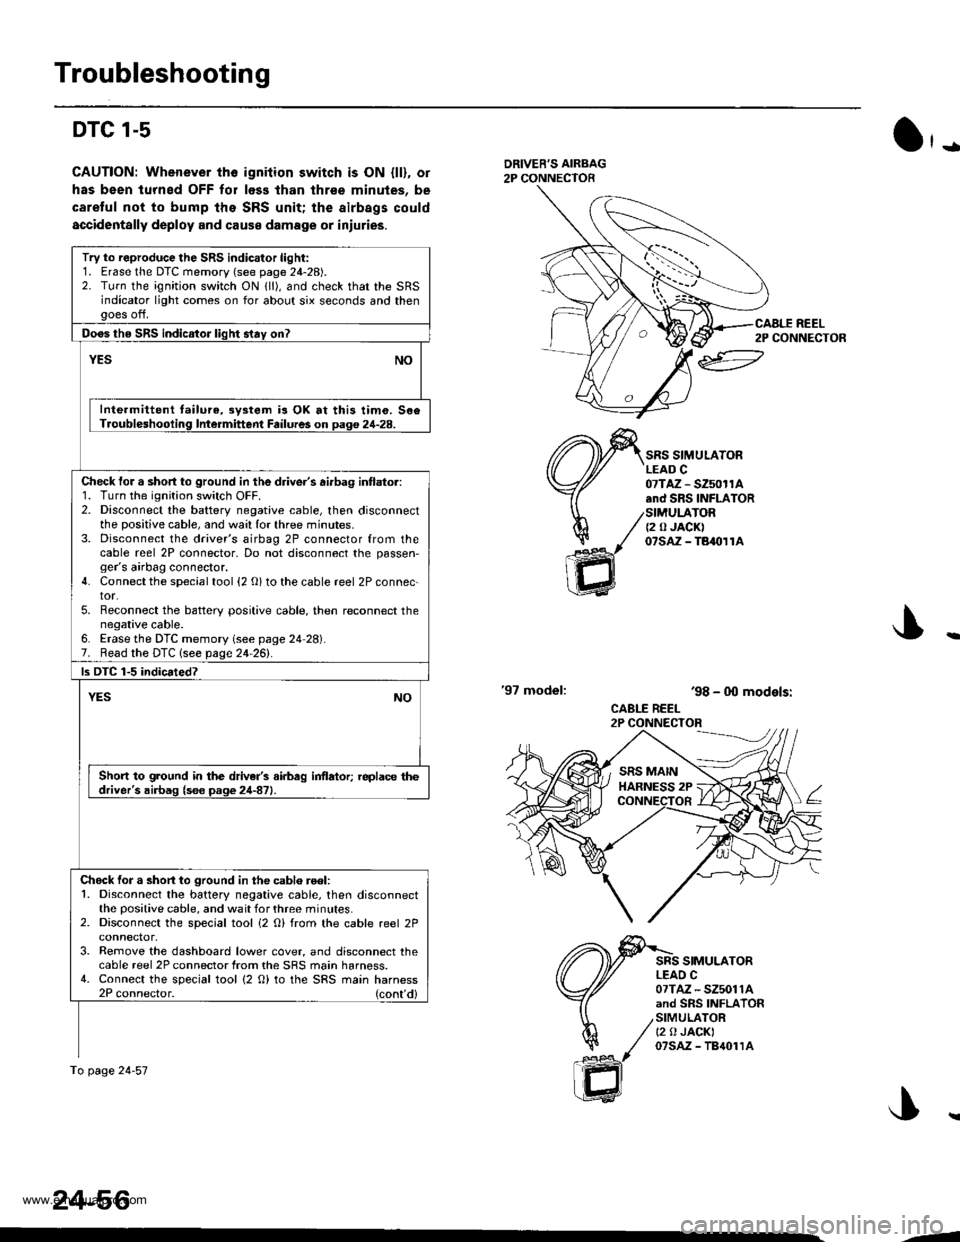 HONDA CR-V 2000 RD1-RD3 / 1.G Service Manual 
Troubleshooting
DTC l-s
CAUTION: Whenever tho igniiion switch is ON {ll), or
has been lurned OFF for loss lhan thrse minules, be
caretul not to bump the SRS unit; the airbags could
accidentally deplo